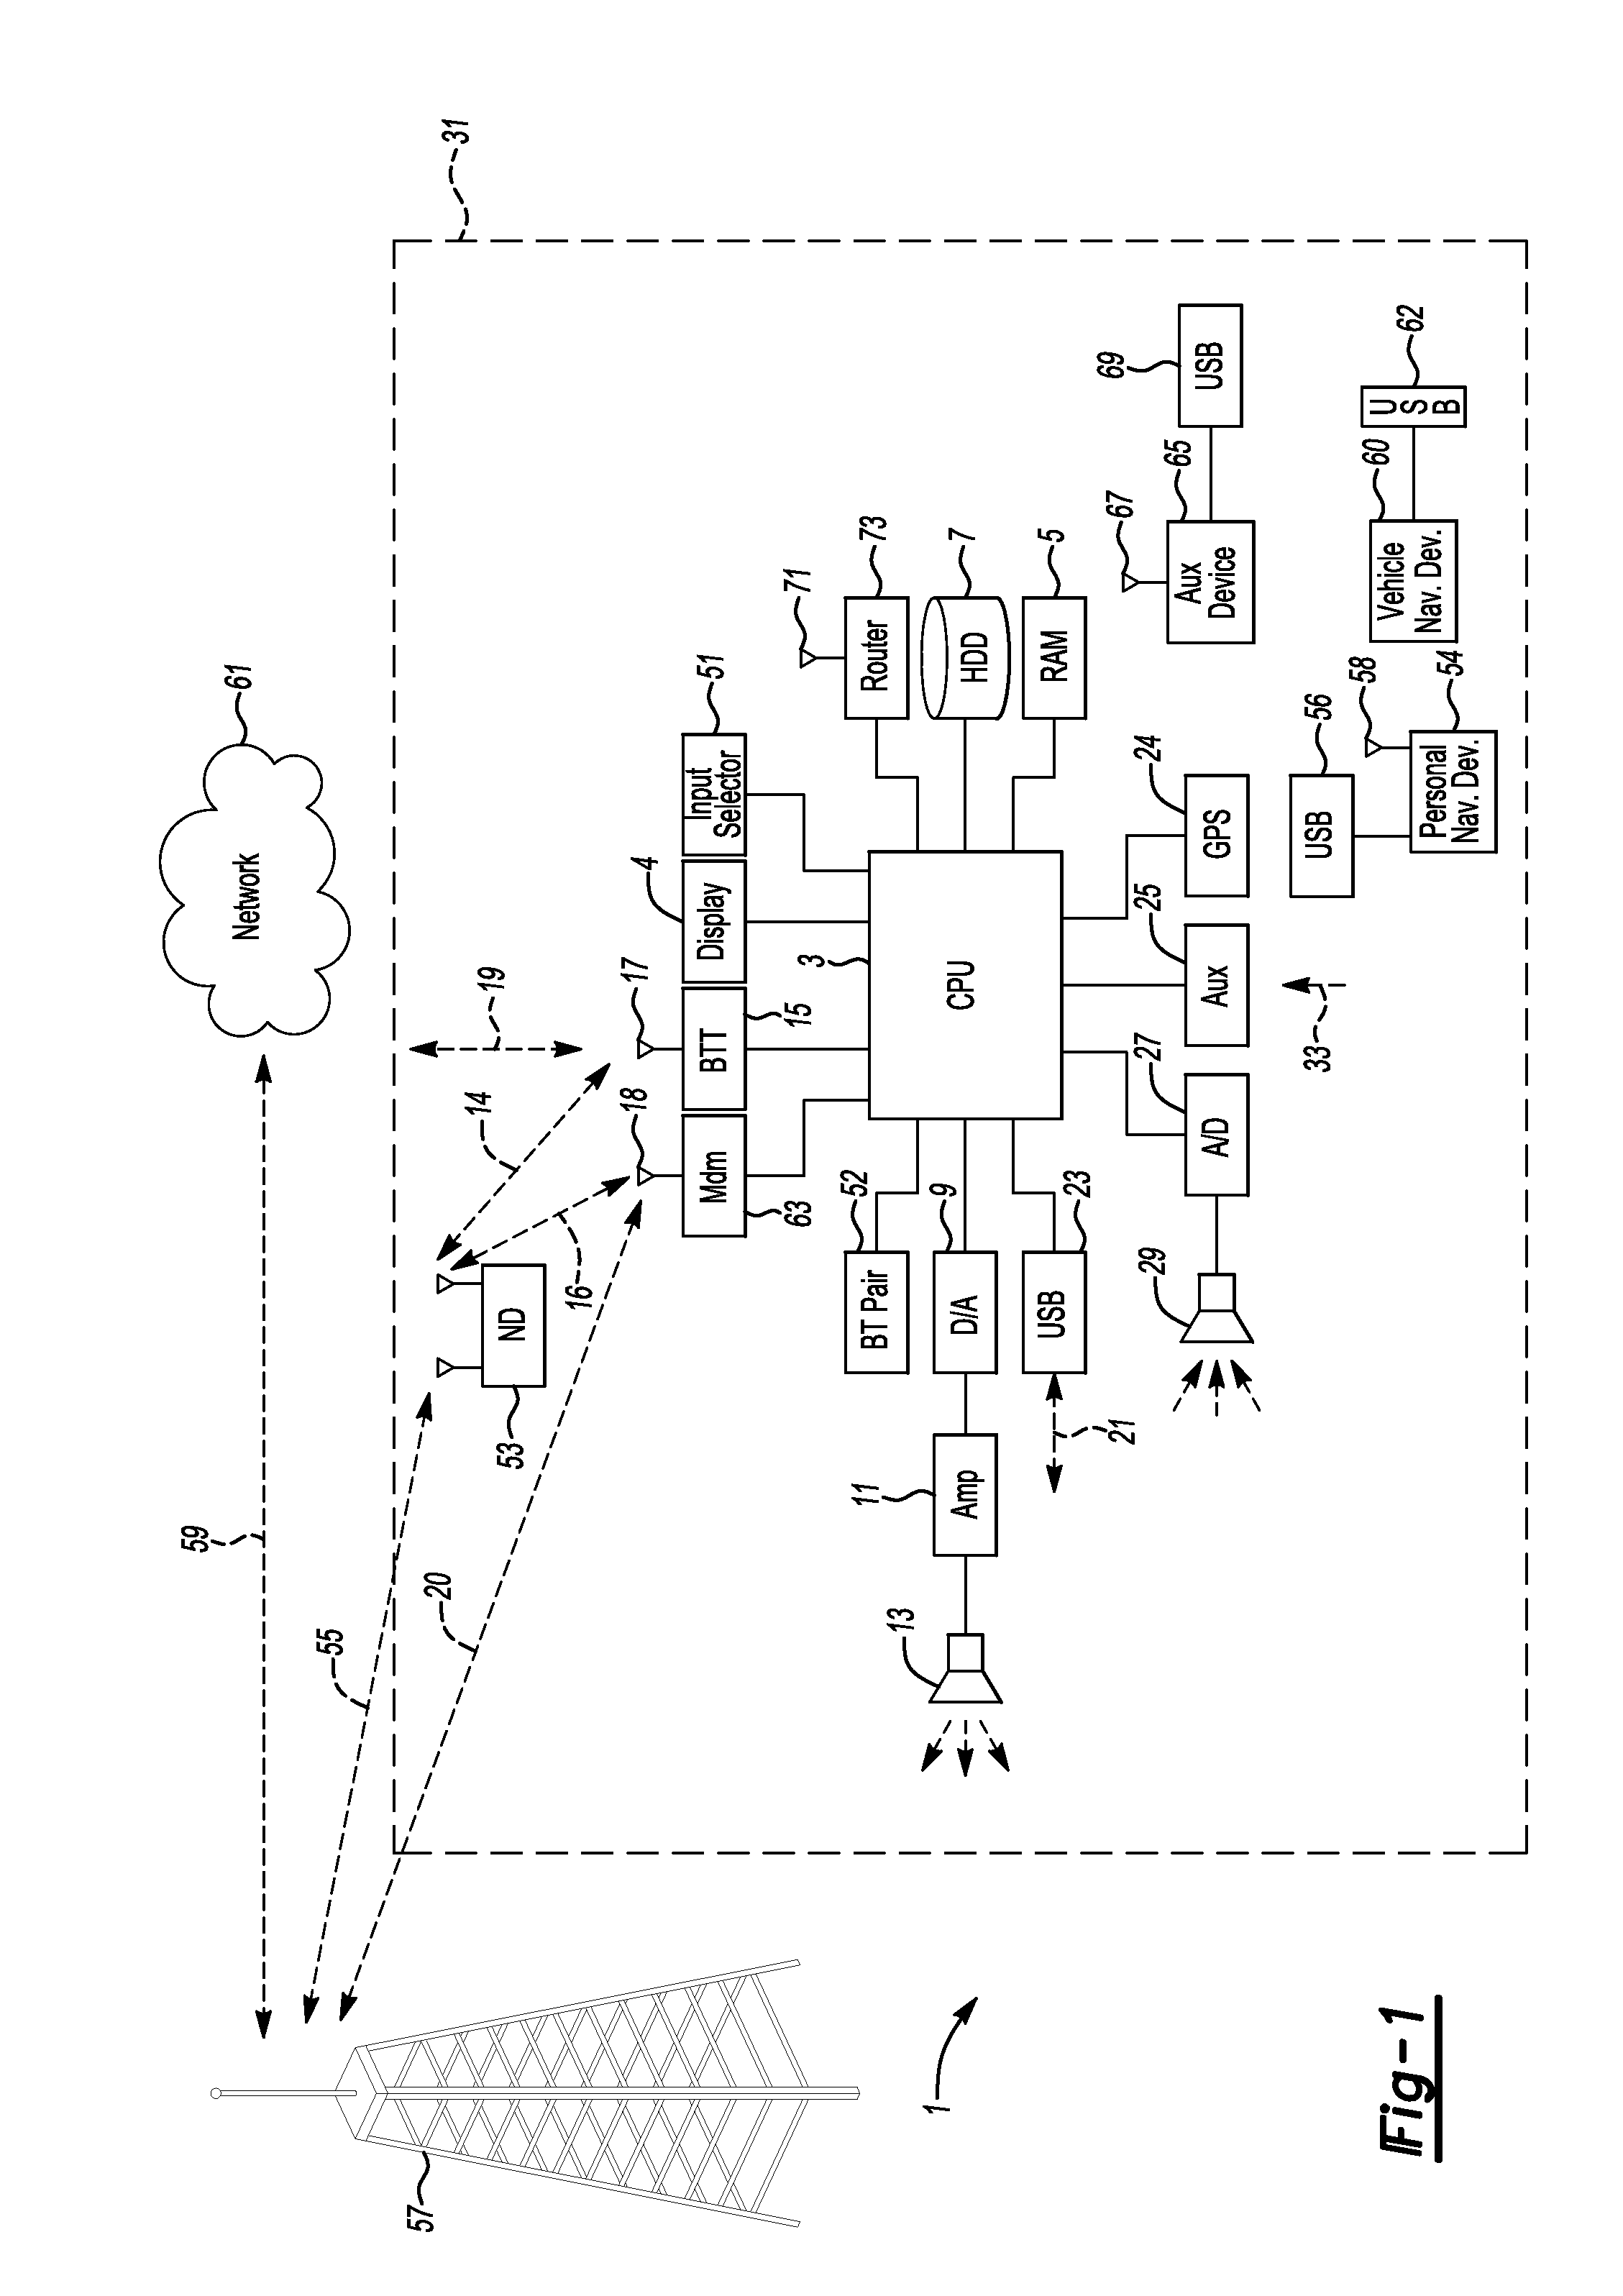 Methods and systems for implementing and enforcing security and resource policies for a vehicle